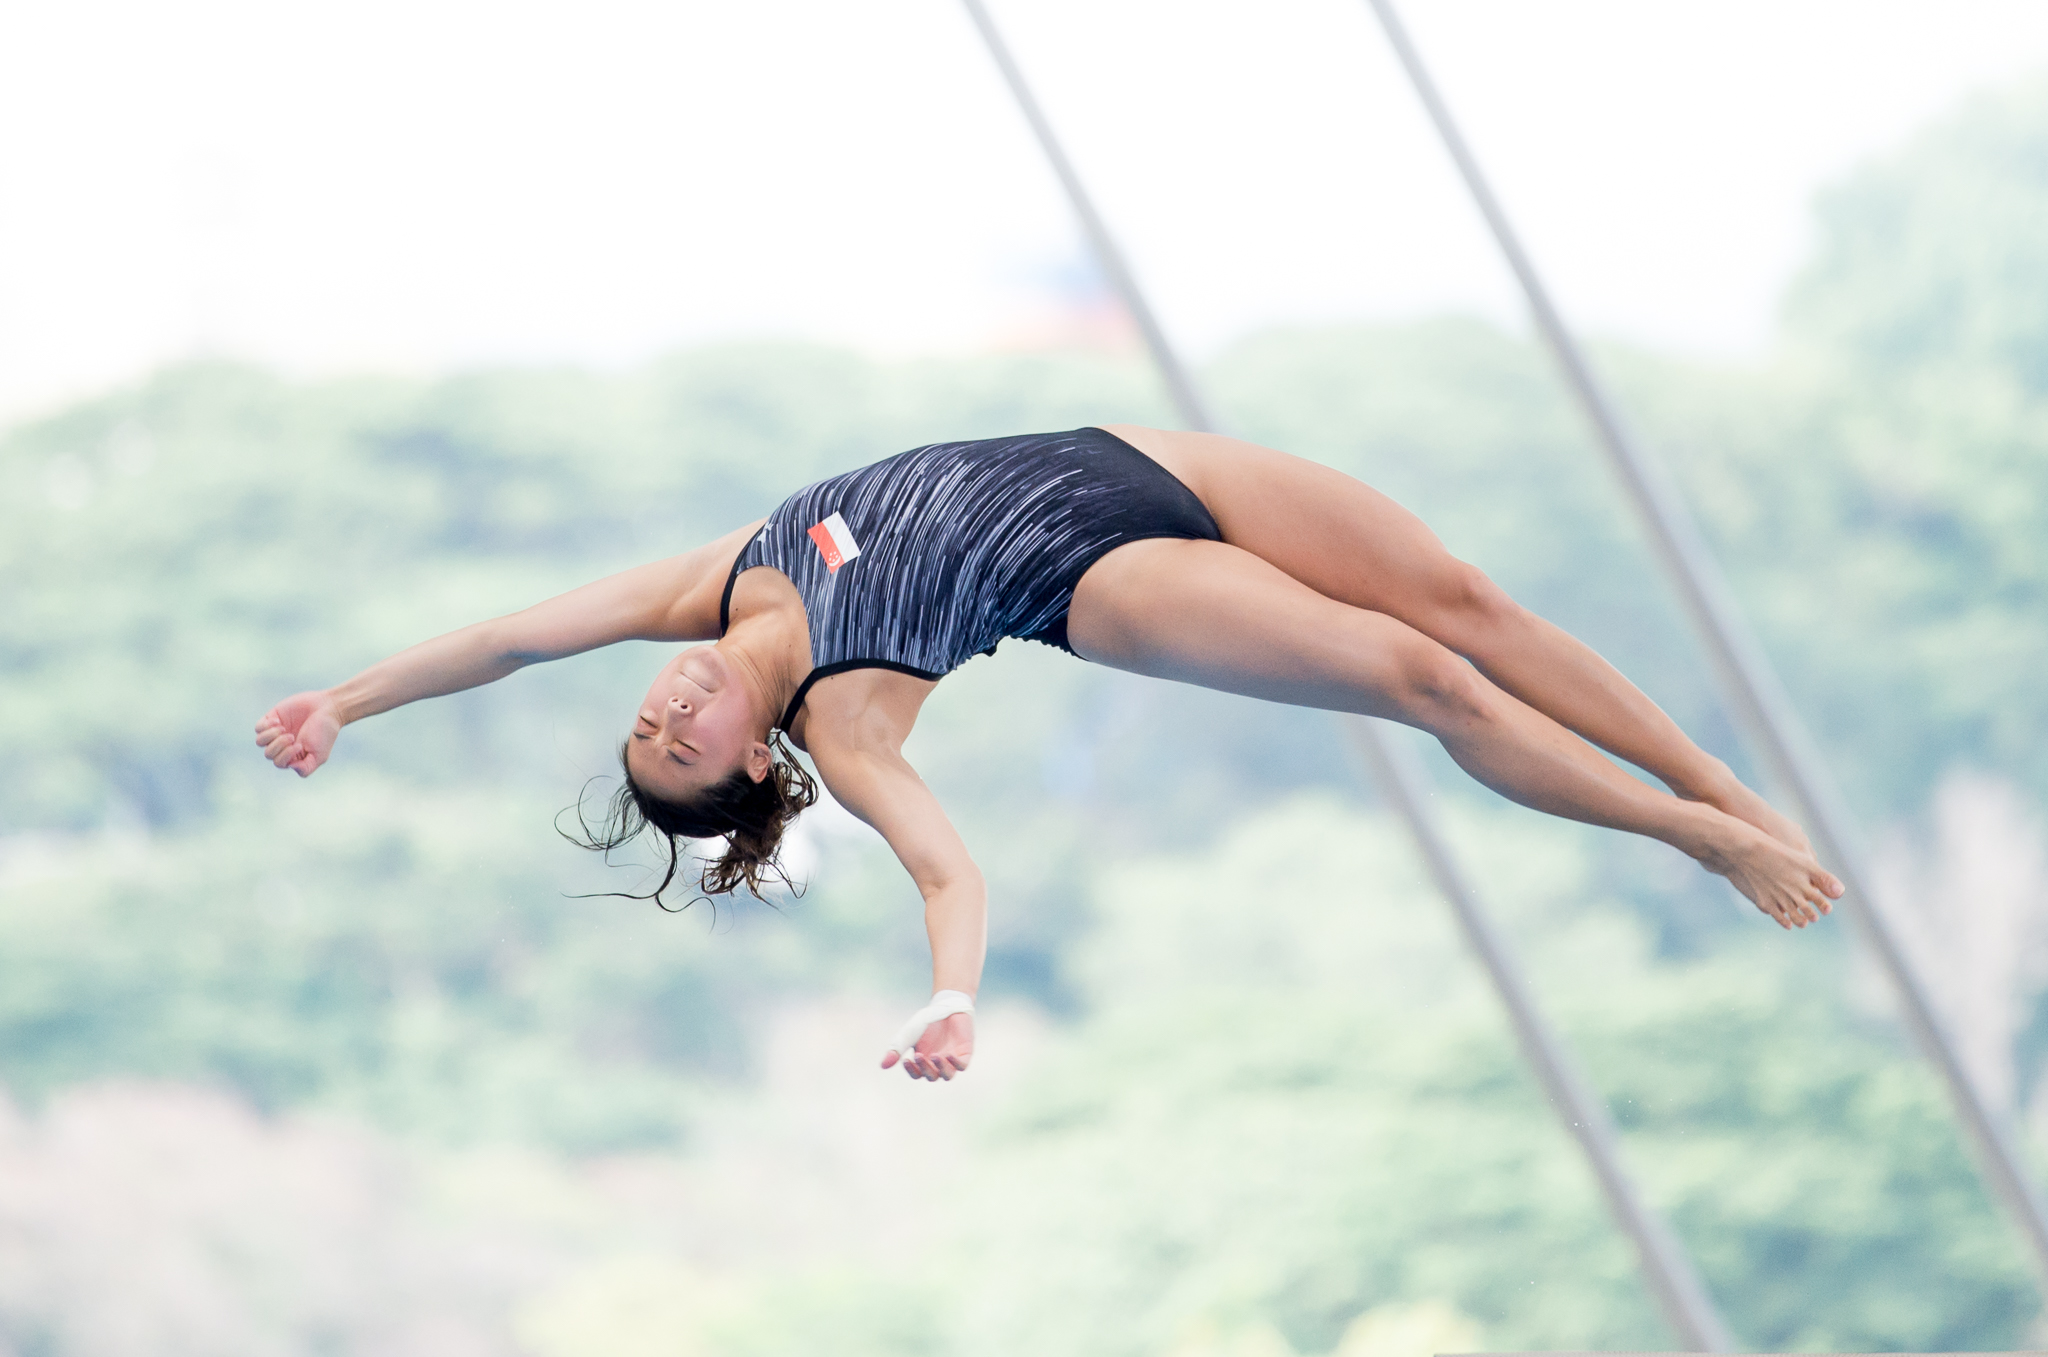 A Singaporean Diver in action during the SEA Games at the National Aquatic Centre, Bukit Jalil.